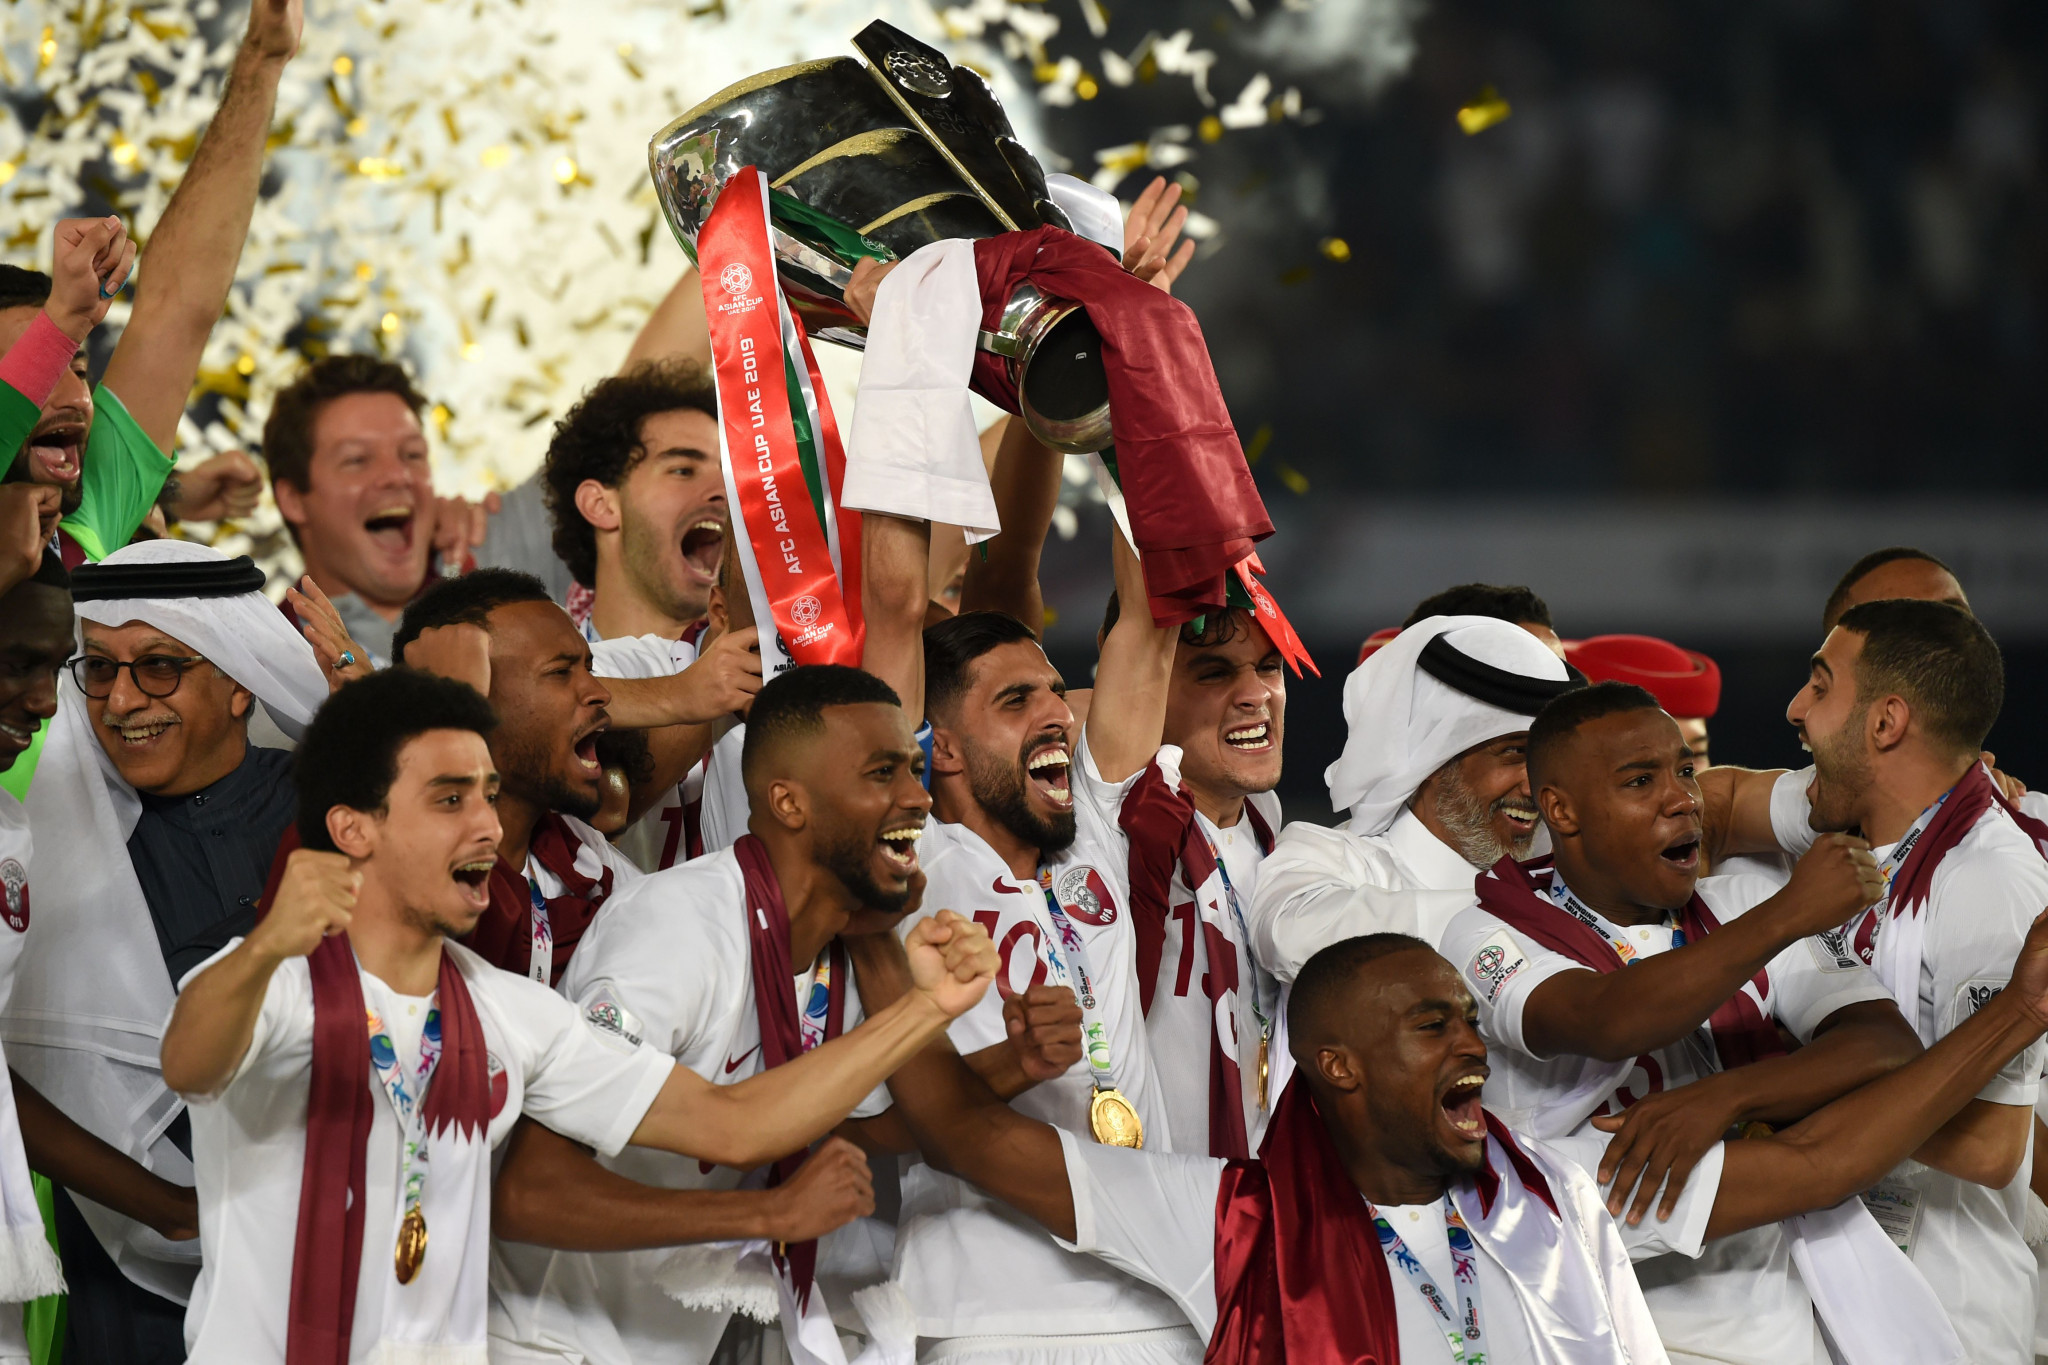 Qatar's men's football team were also honoured at the ceremony ©Getty Images